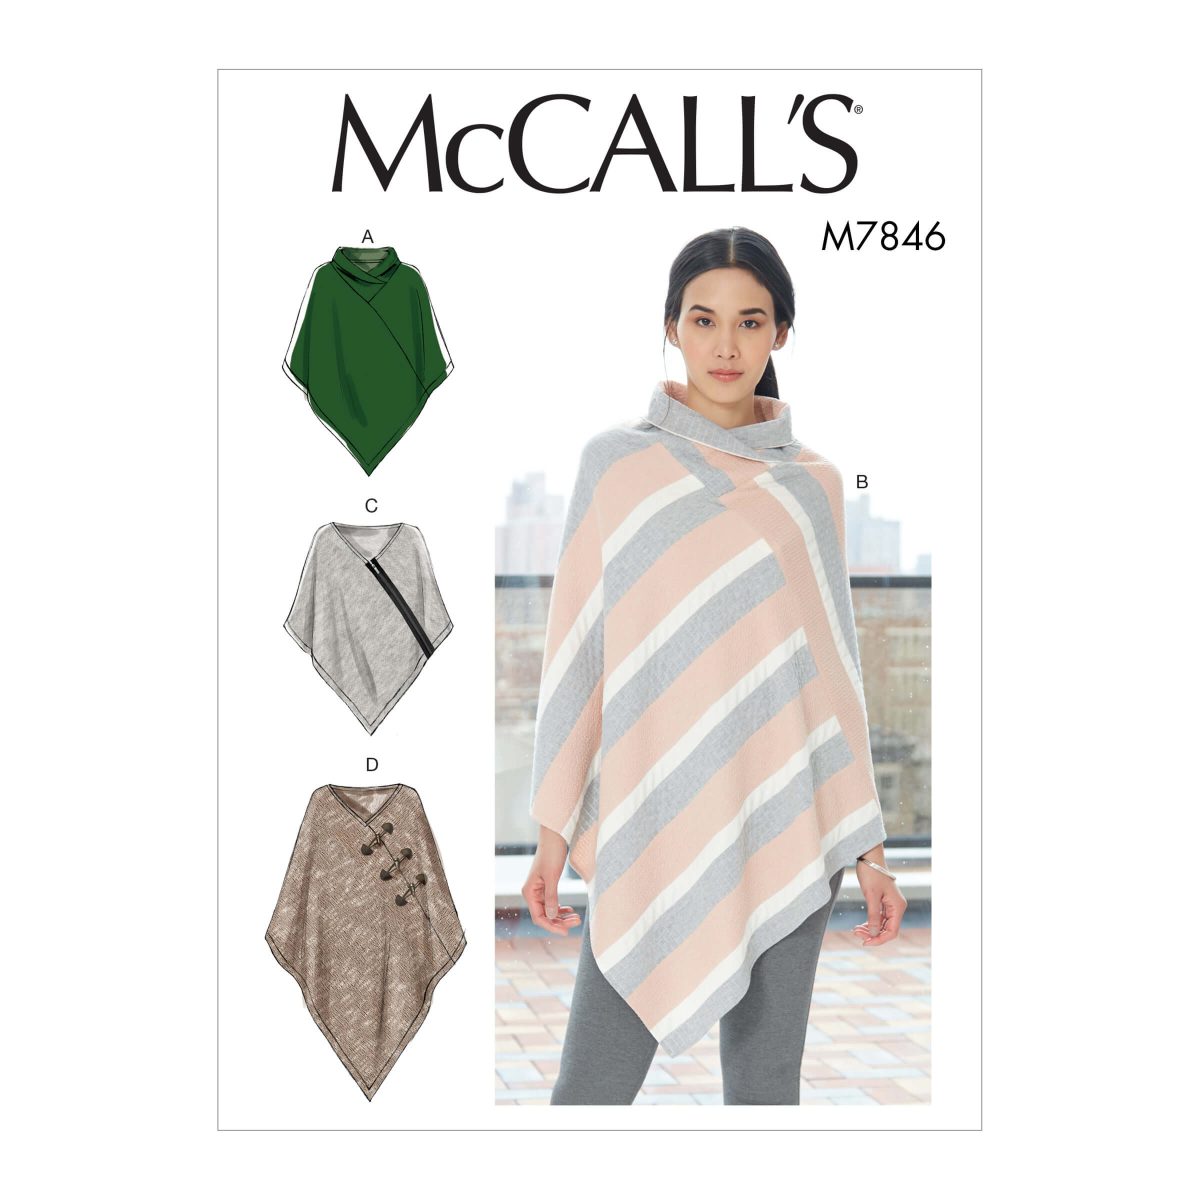 McCall's Sewing Pattern M7846 Misses' Ponchos